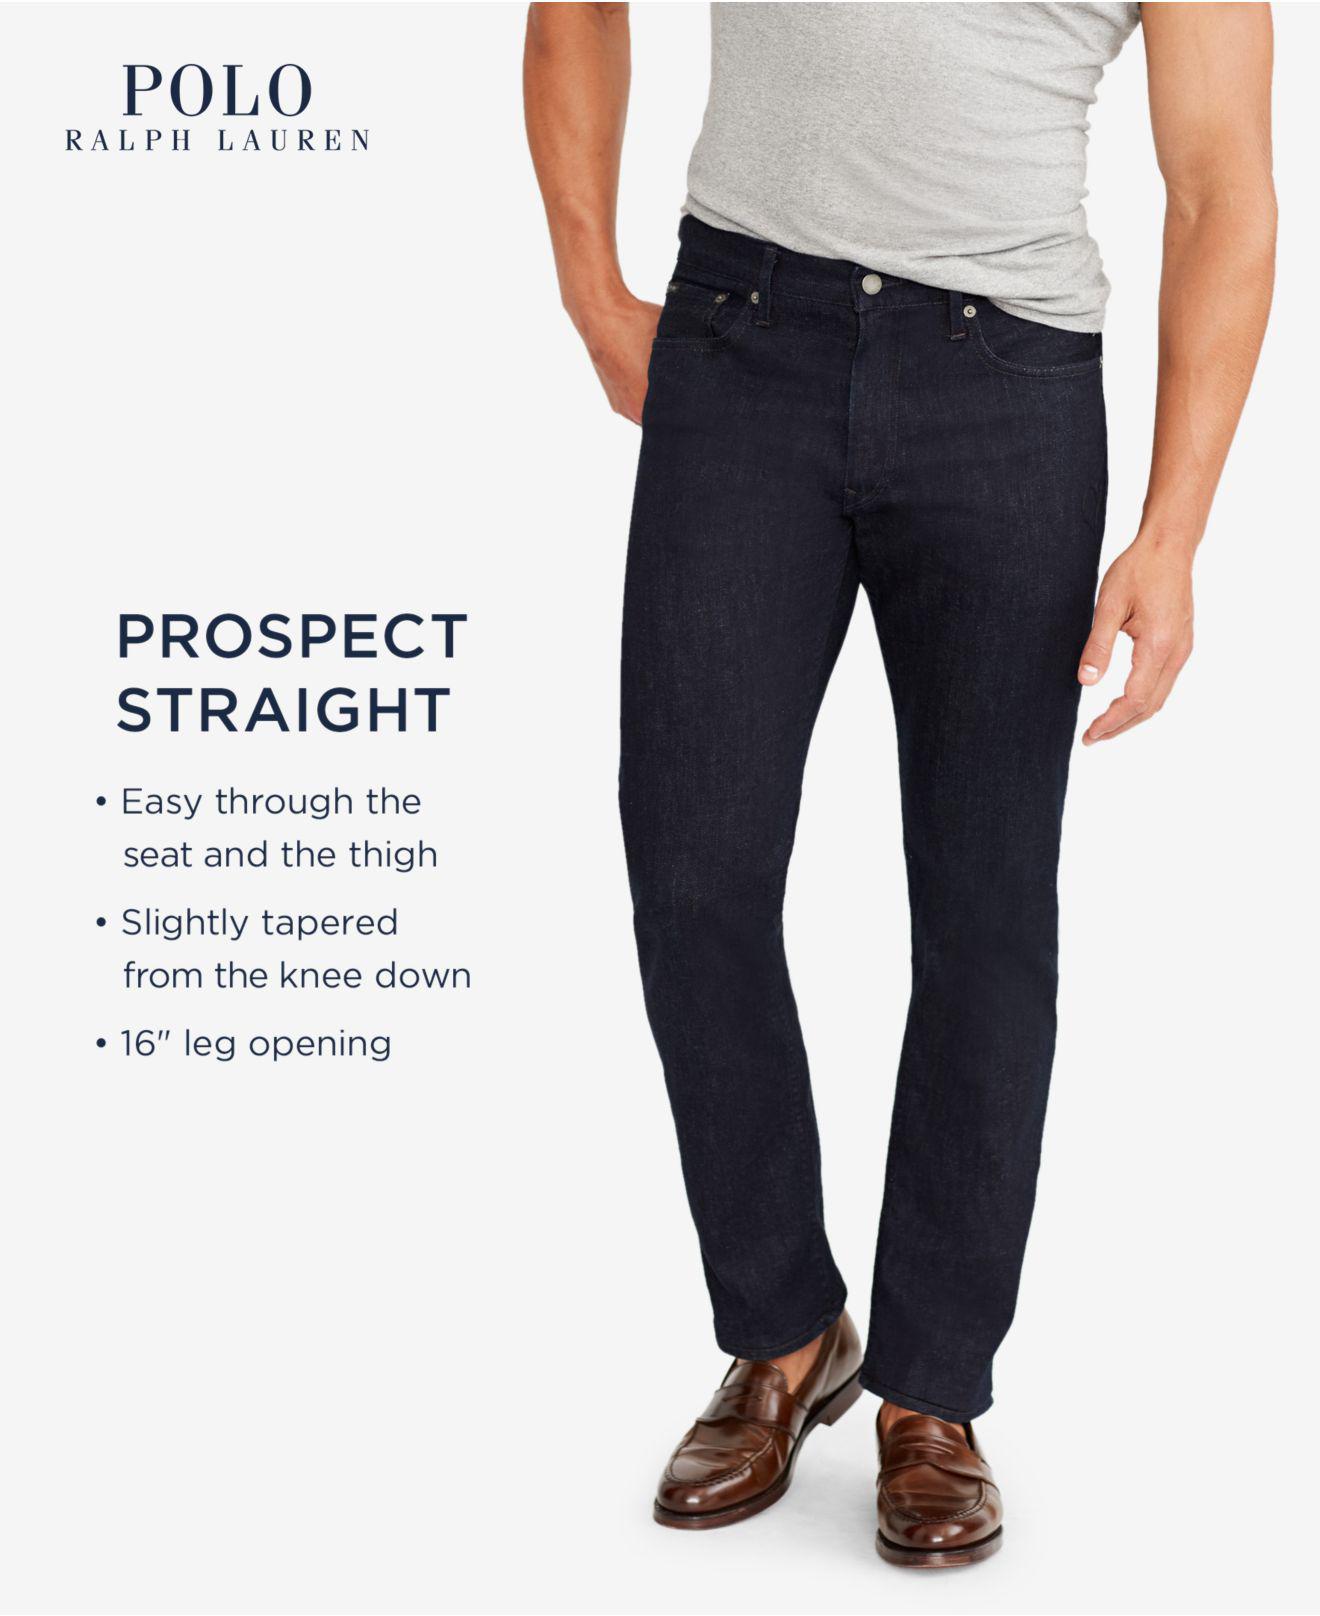 polo prospect straight jeans